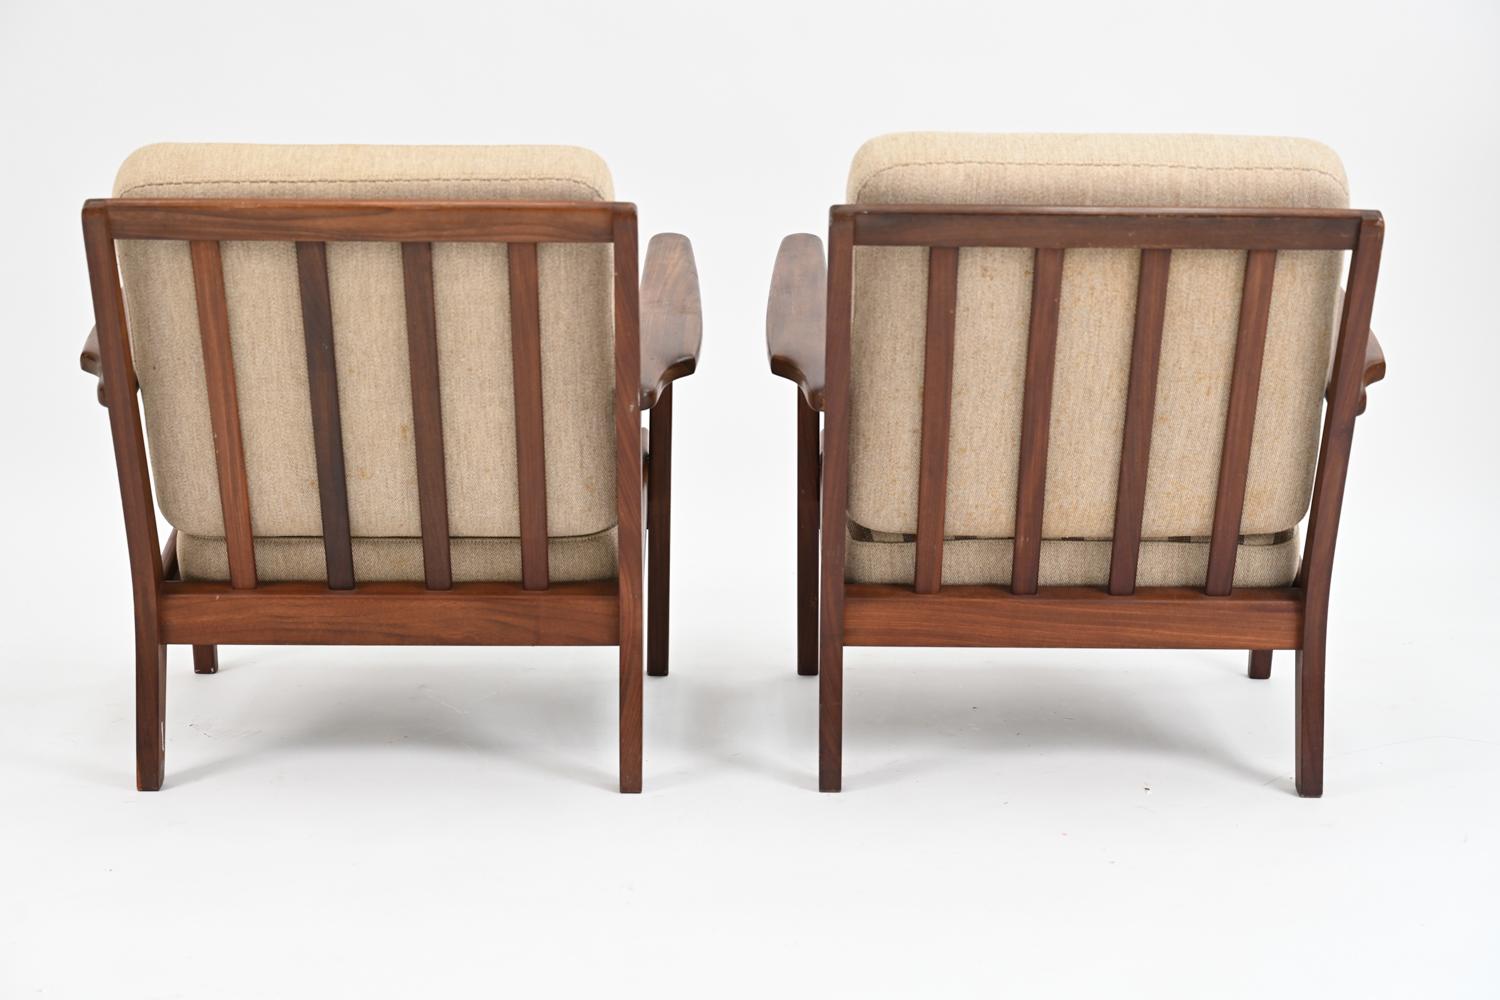 Pair of Danish Lounge Chairs in the Manner of Hans Wegner for GETAMA 1